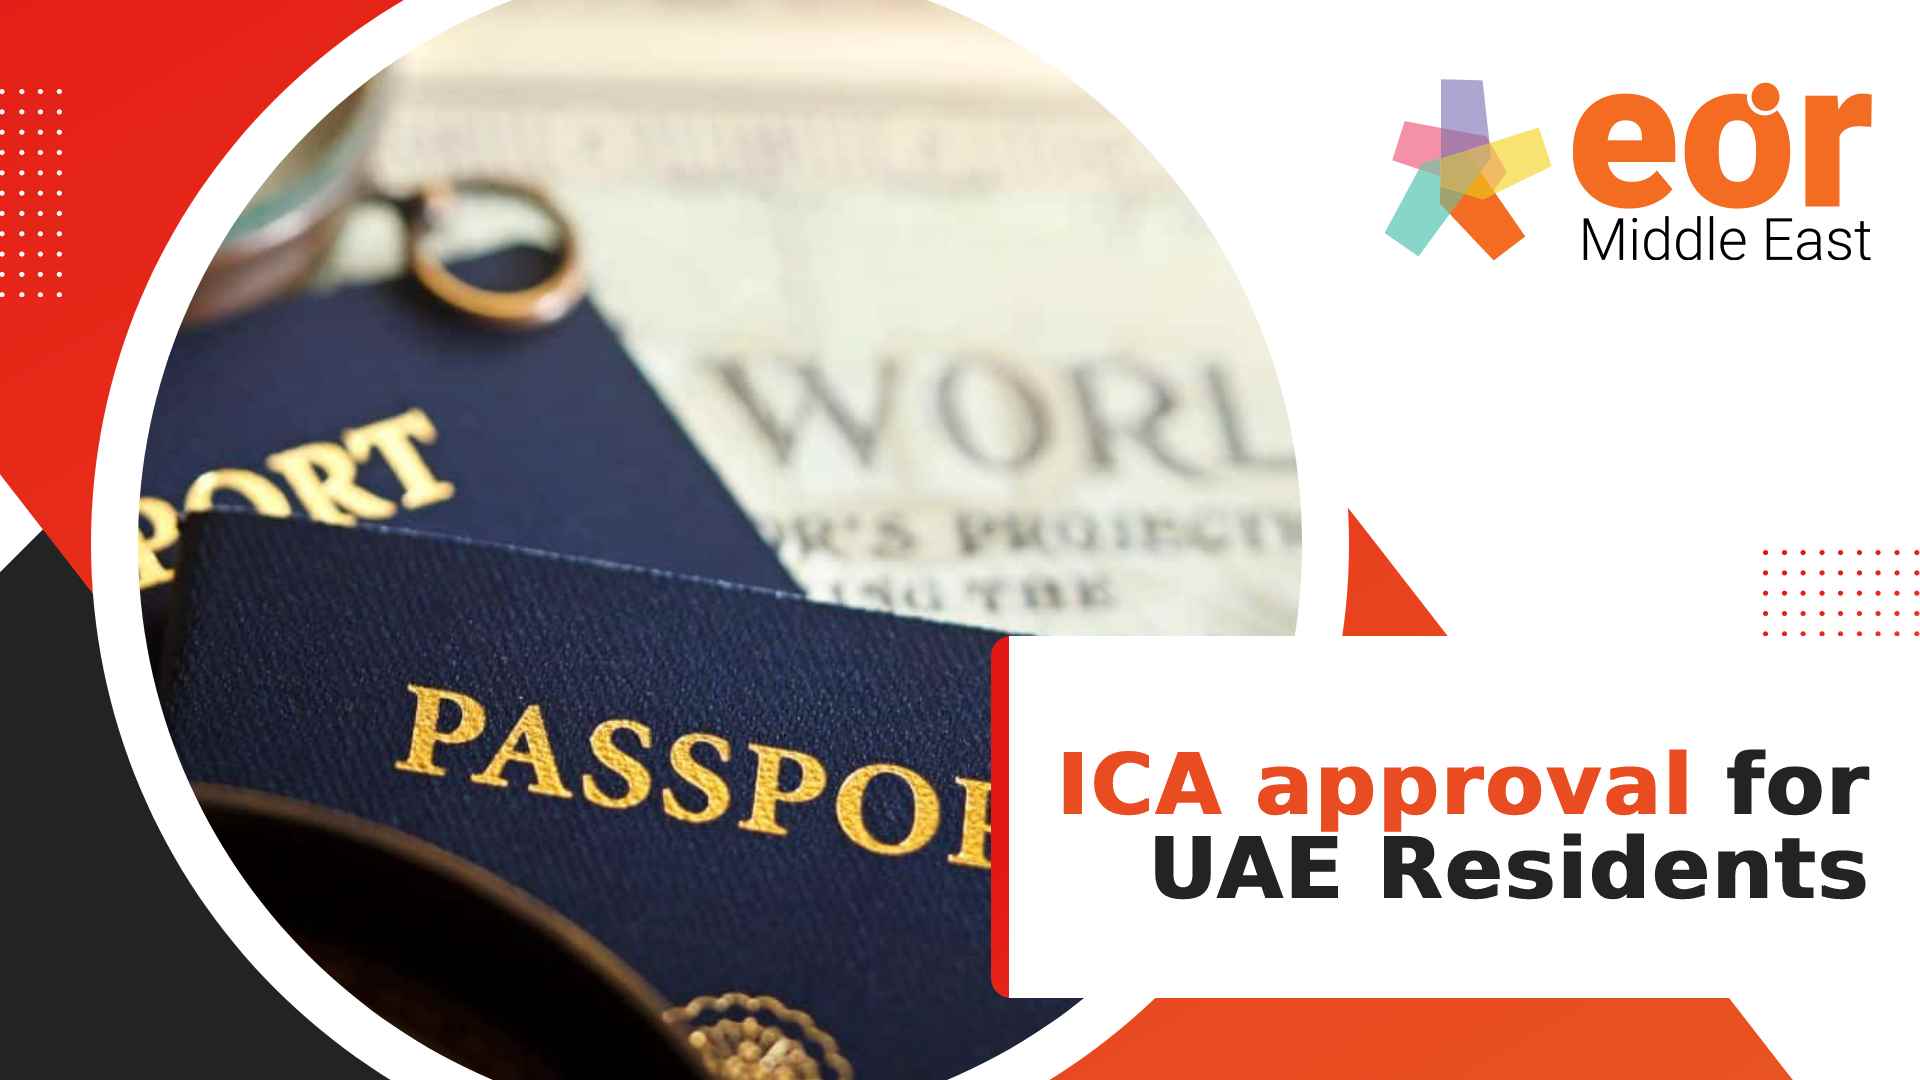 ICA approval for UAE Residents